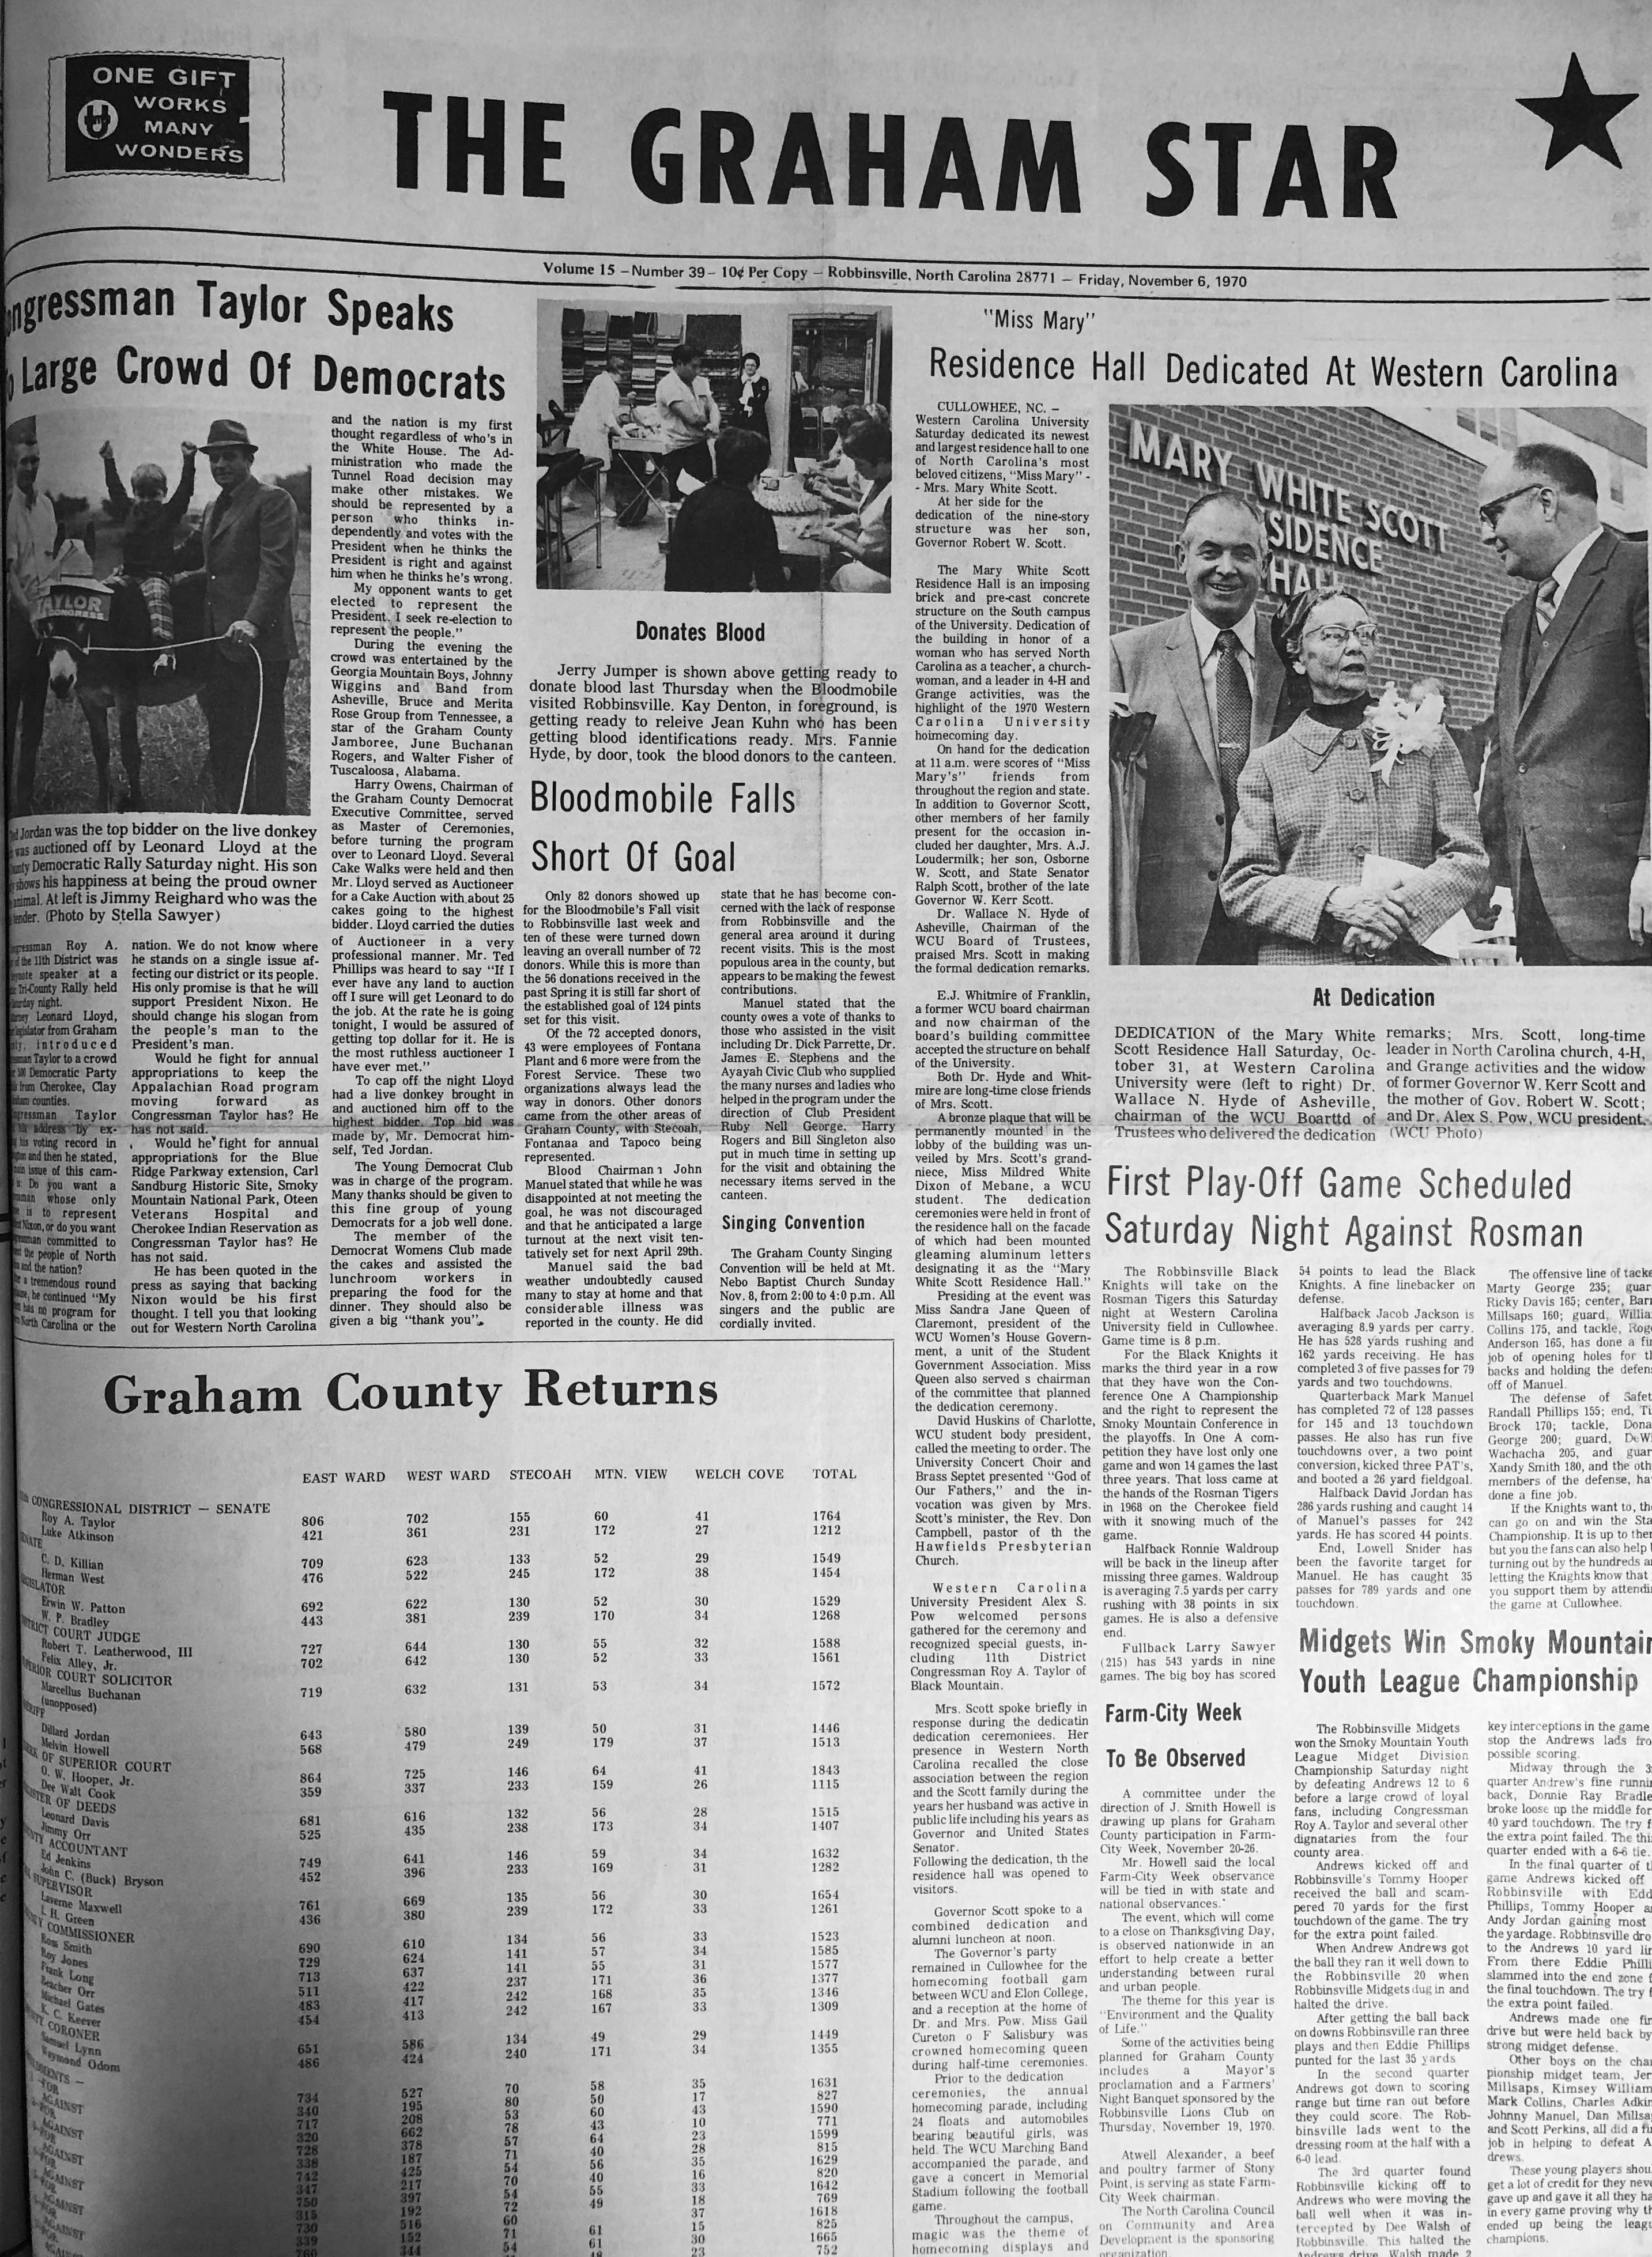 The Graham Star’s front page from 50 years ago (Nov. 6, 1970).